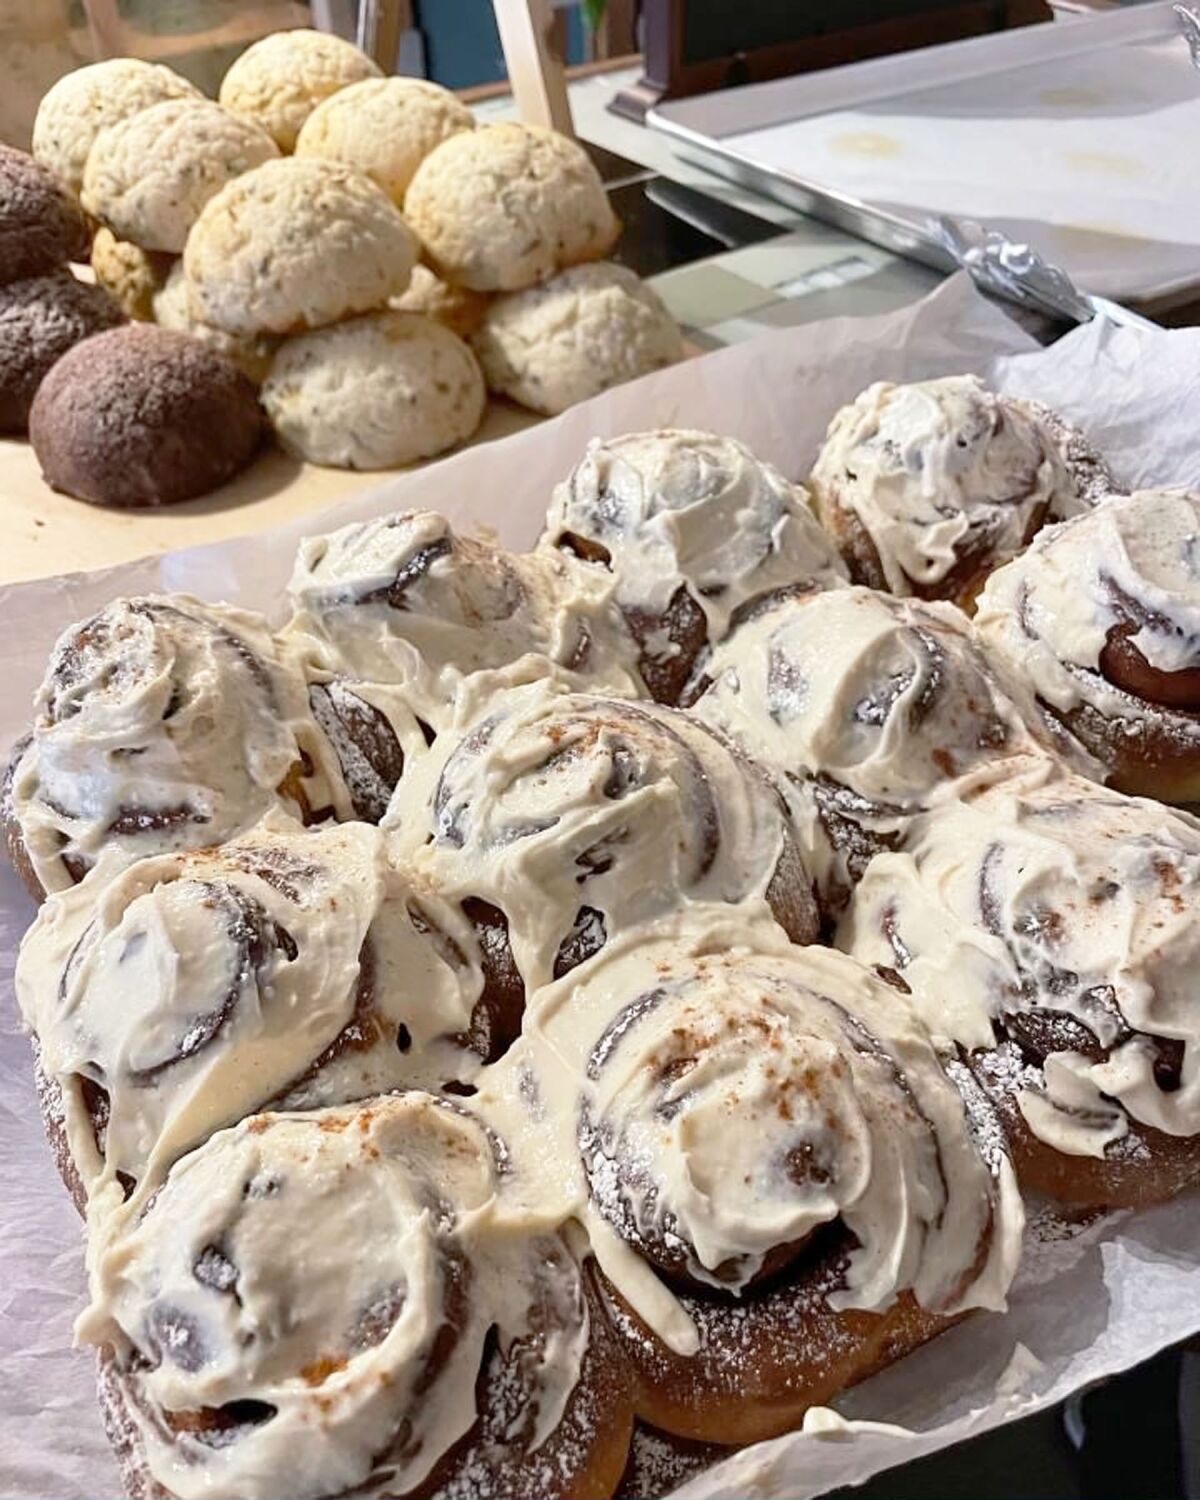 Frosting covered sweet rolls are among items sold at Wildwood Flour in Pacific Beach.